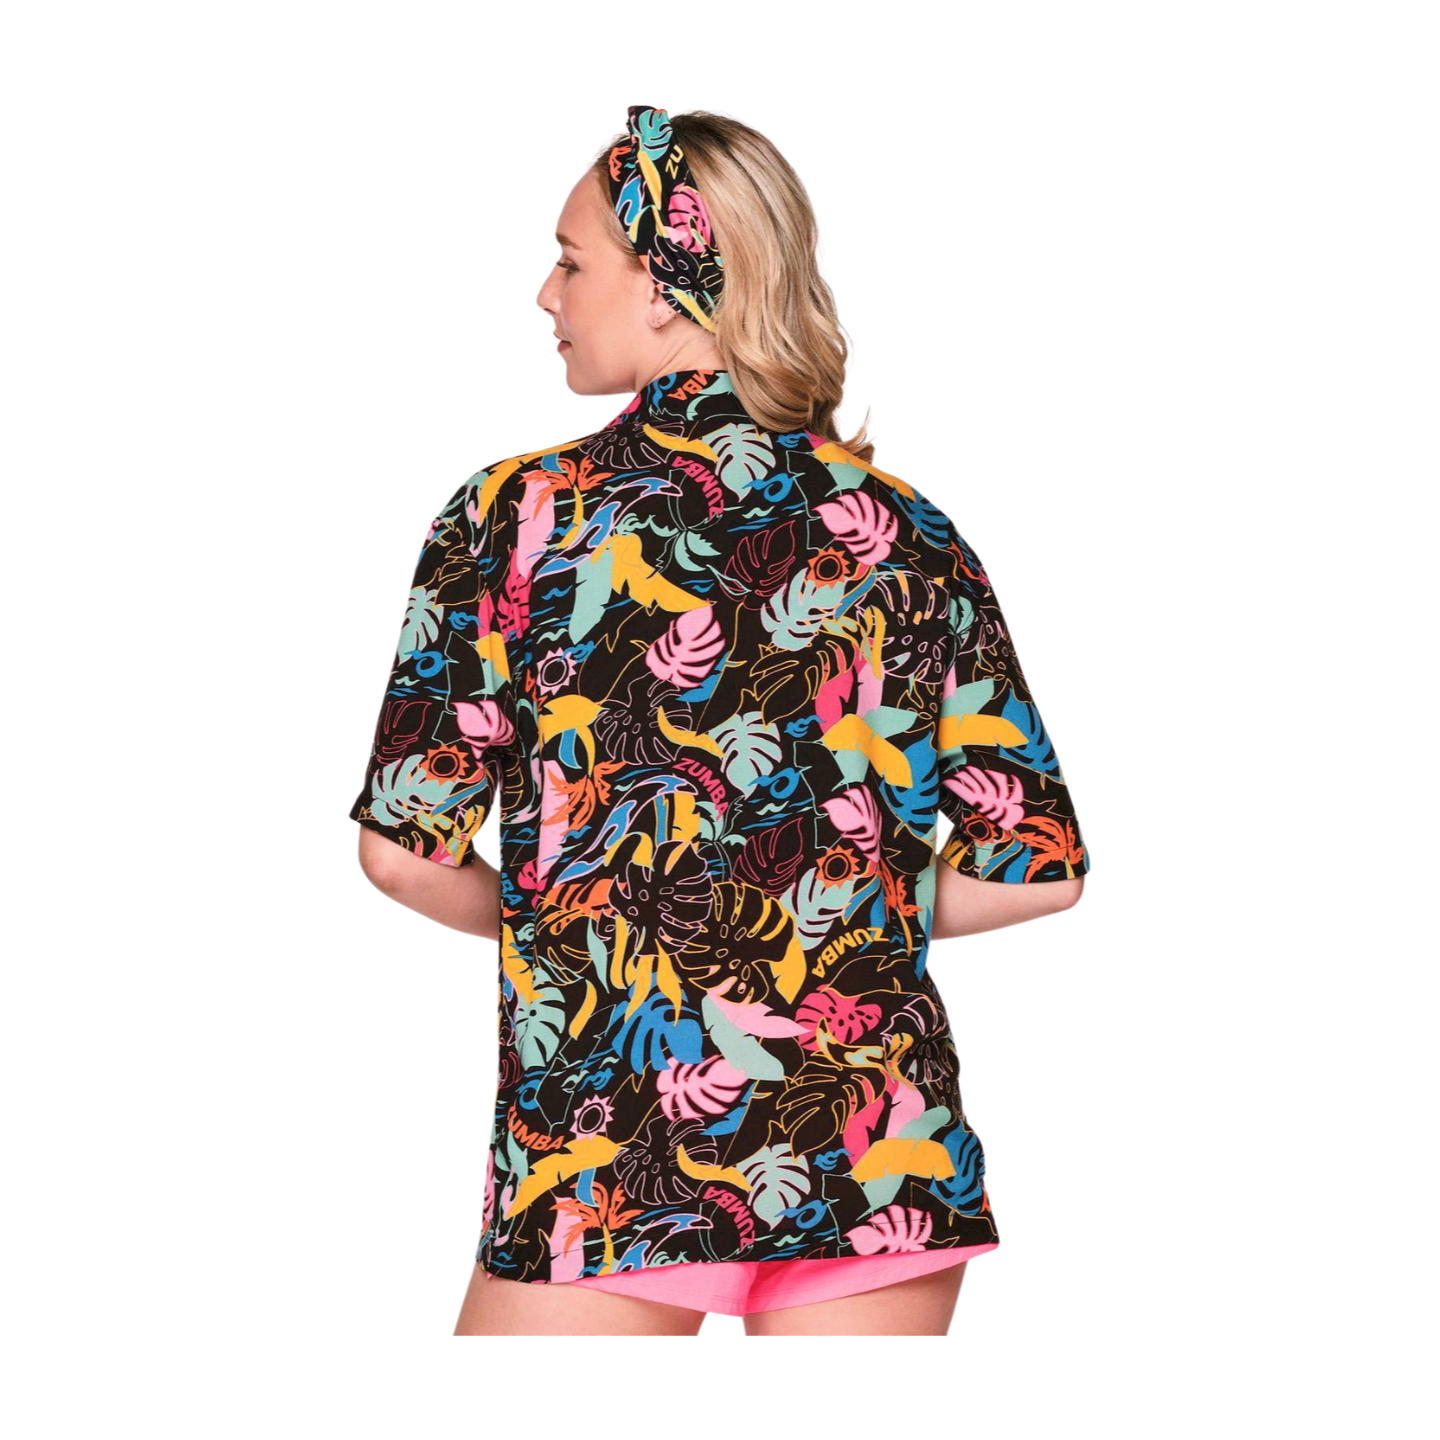 Zumba Palm Party Short Sleeve Button Up (Special Order)